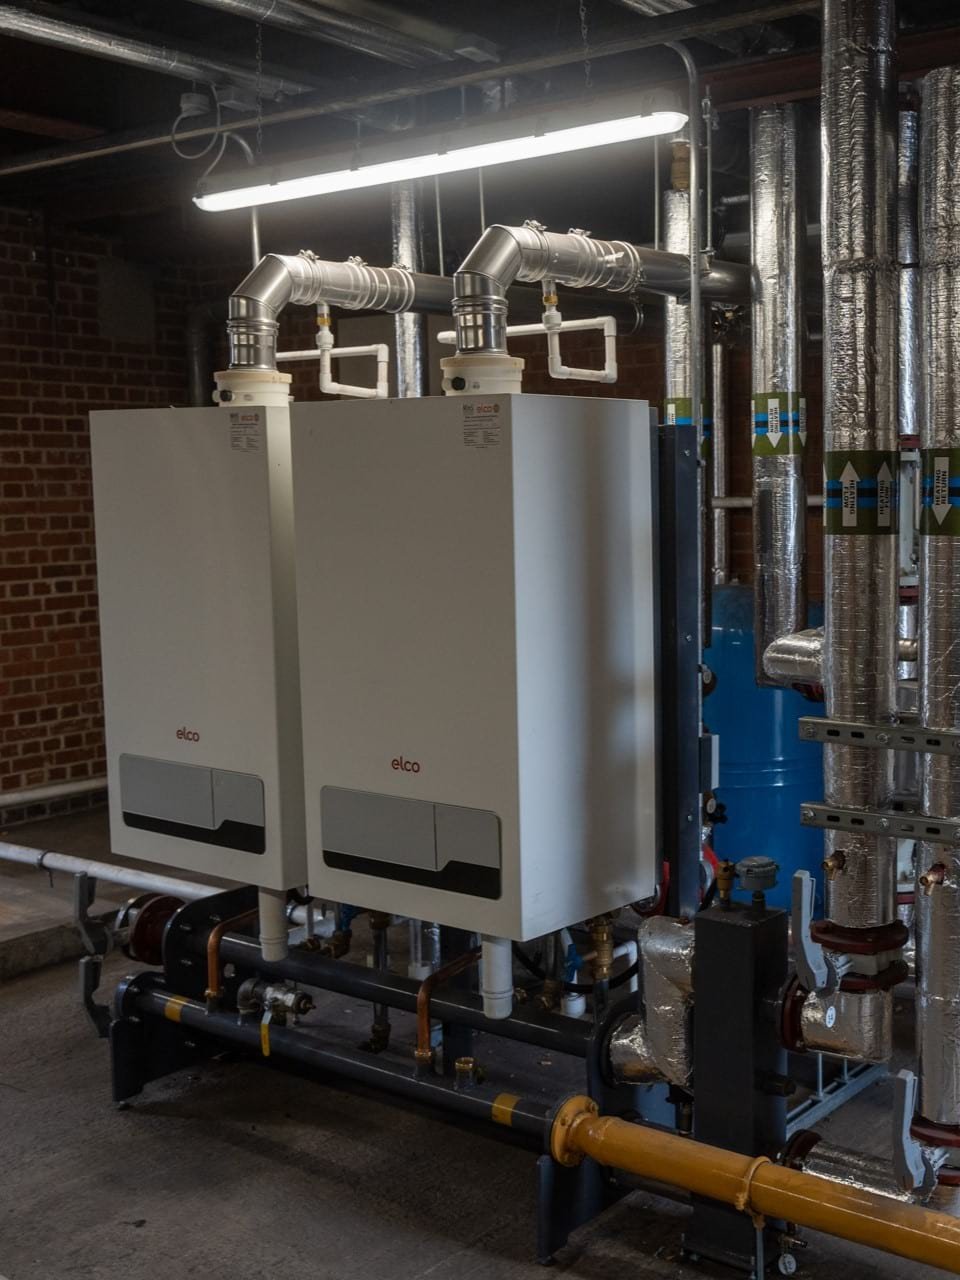 The new natural gas boilers